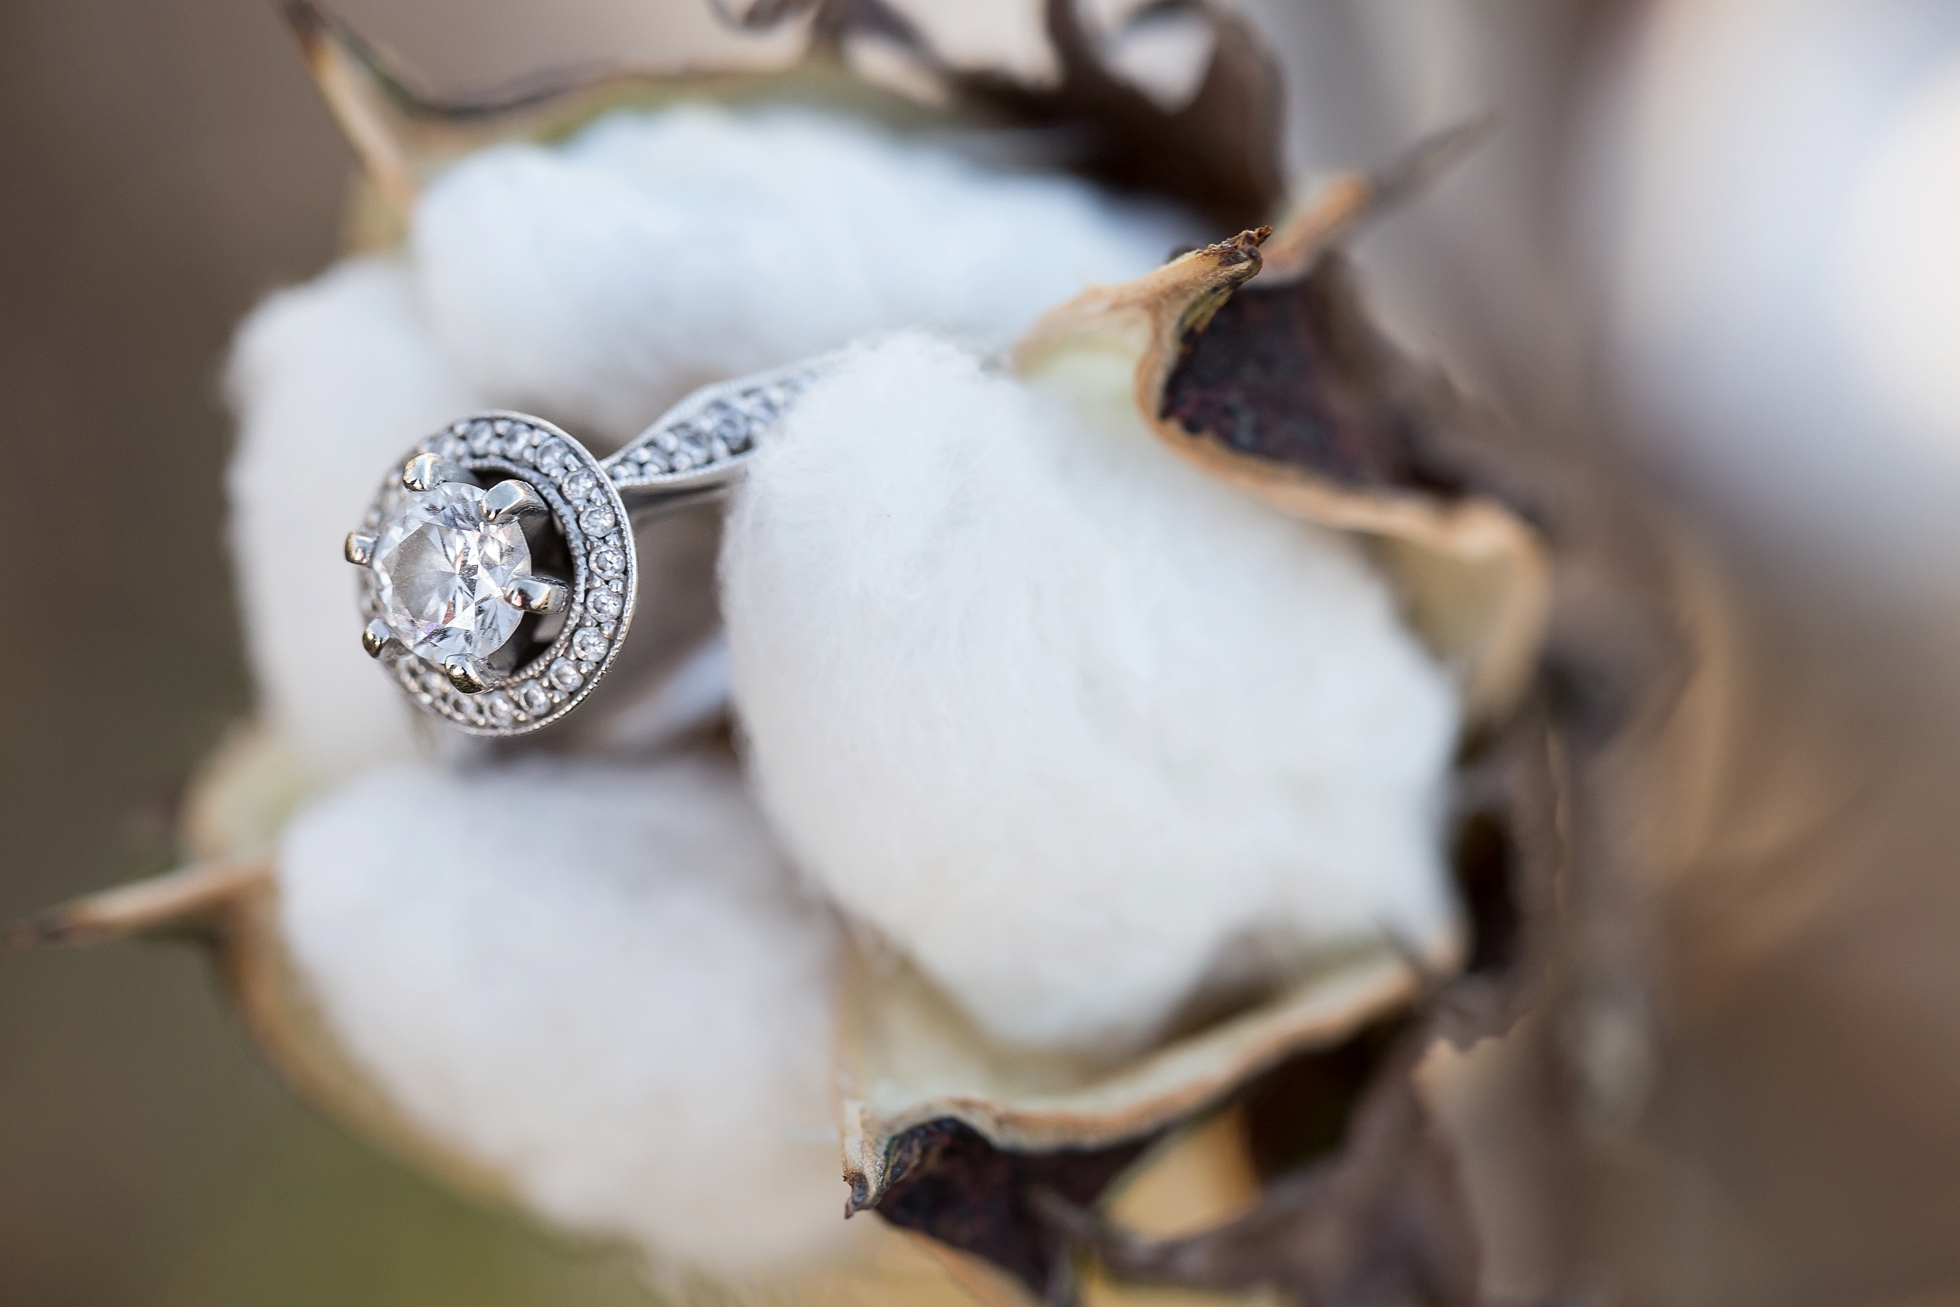 cotton field engagement ring